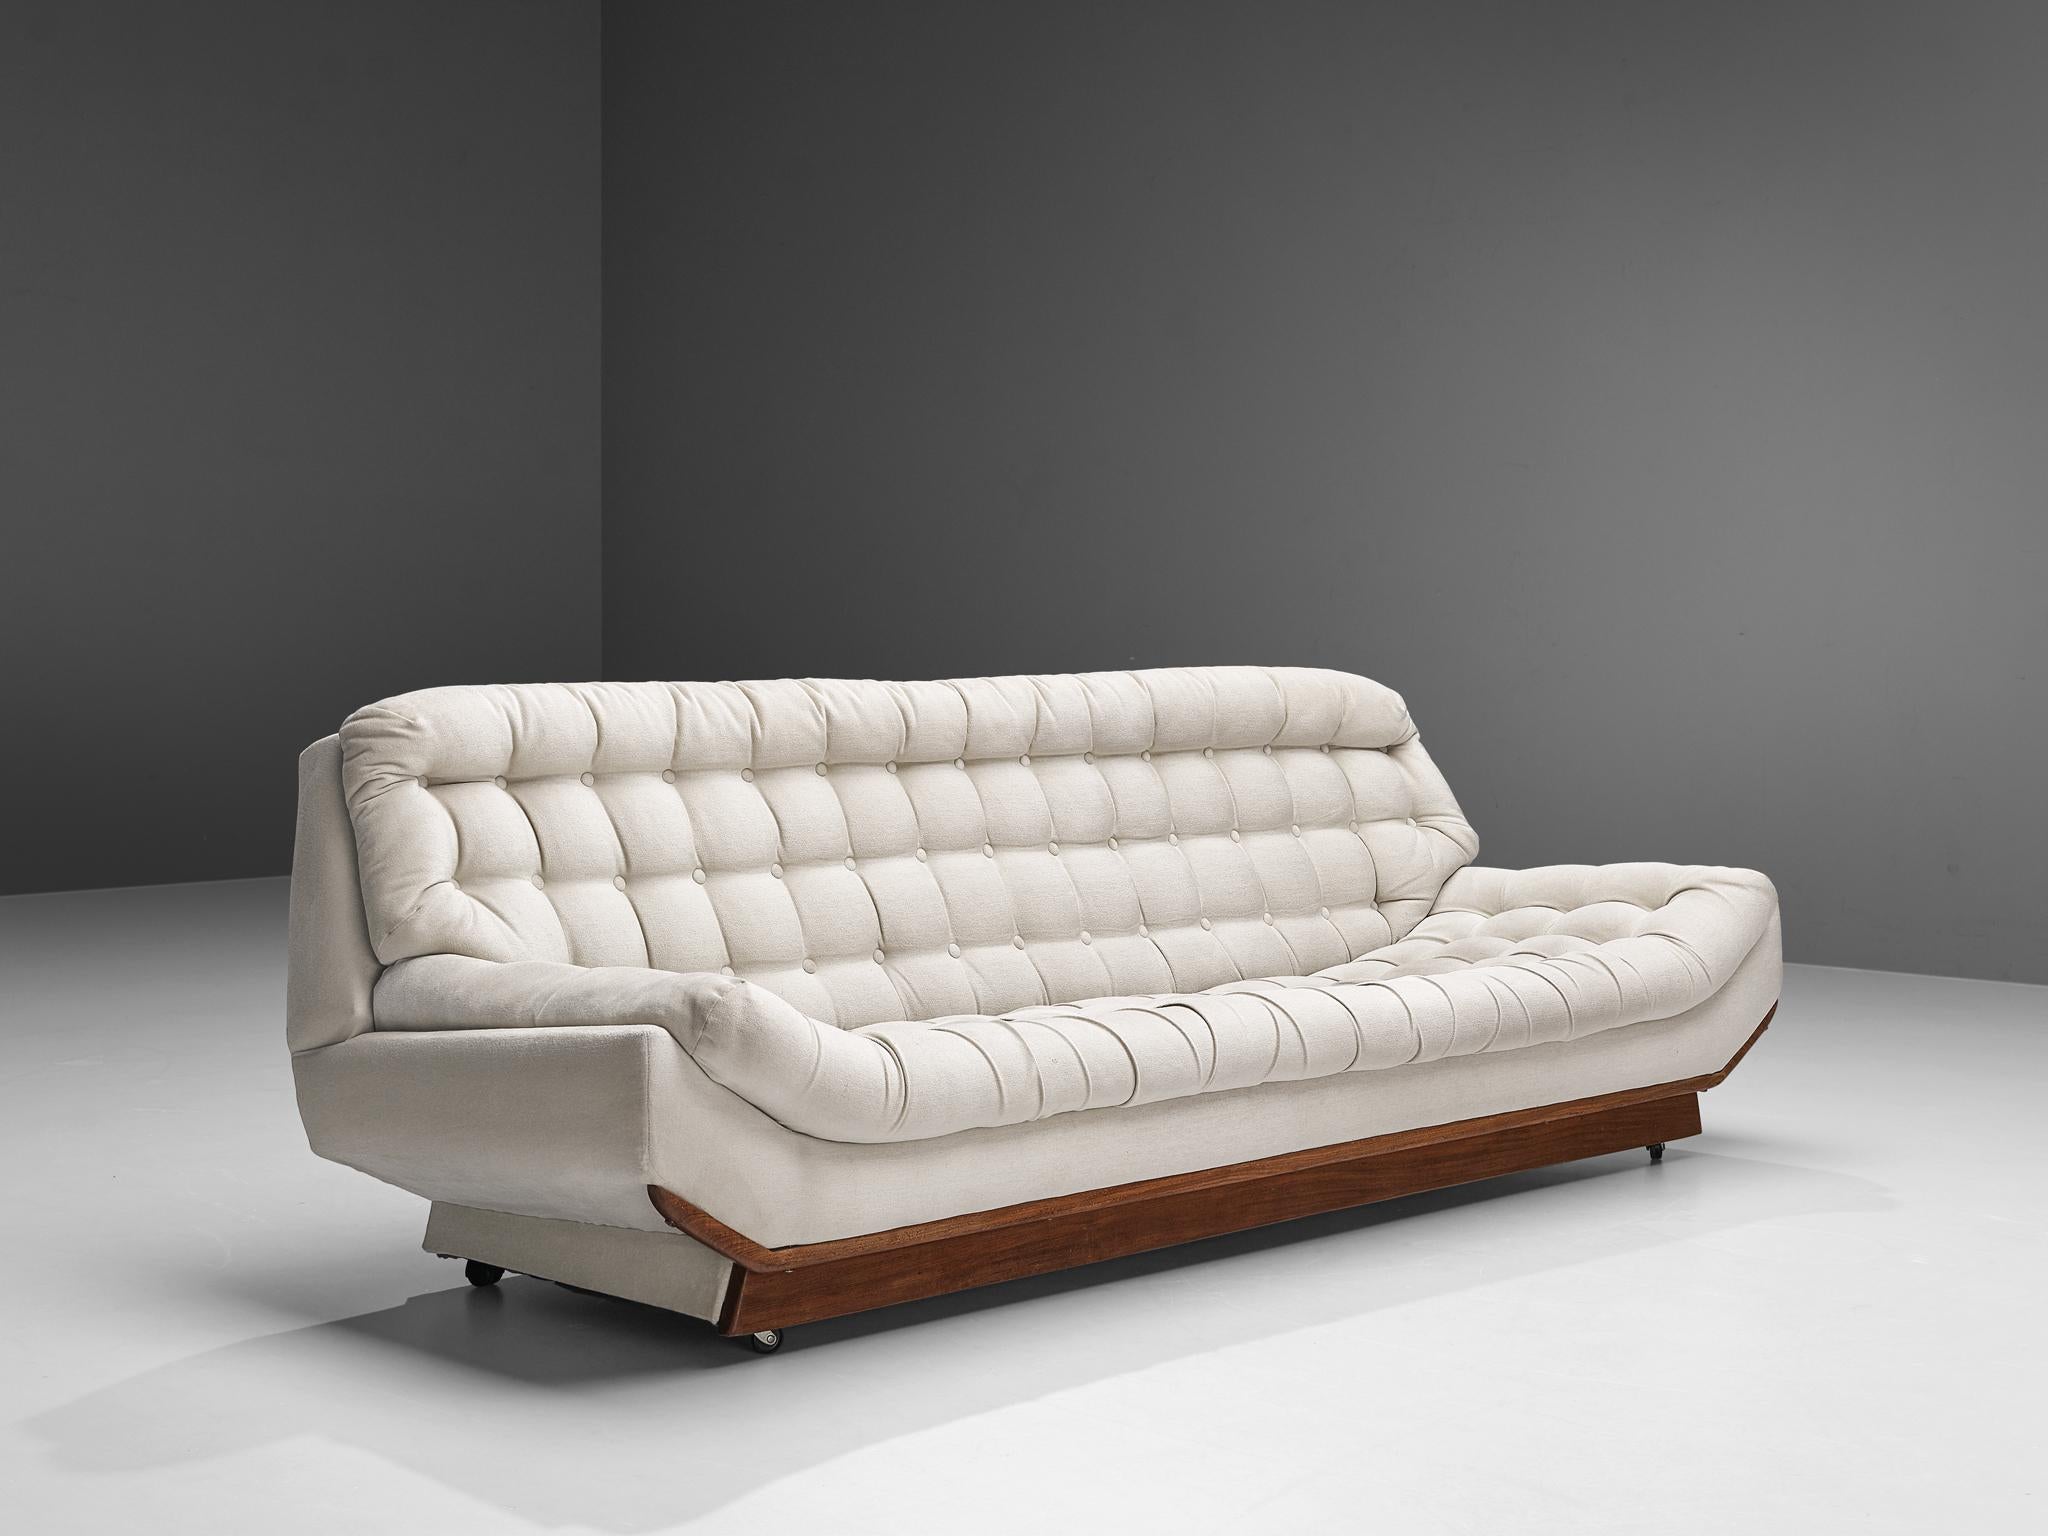 Italian Sofa with White Tufted Upholstery 4